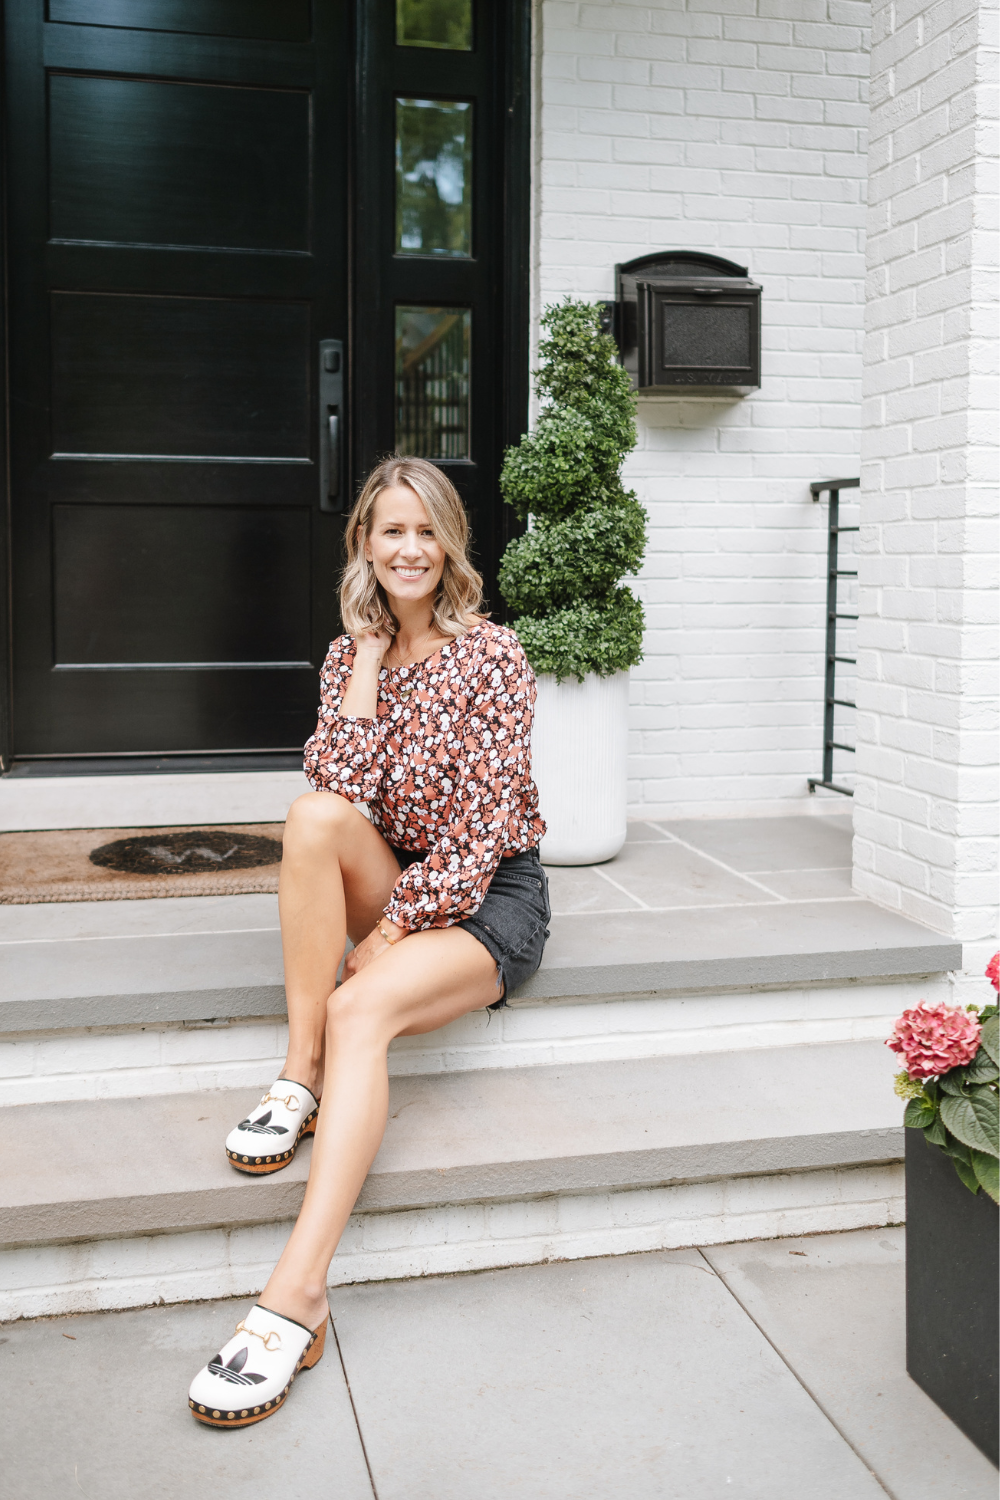 Suzanne on her front porch wearing a low price floral Amazon top, black denim shorts, and designer Gucci X Adidas clogs